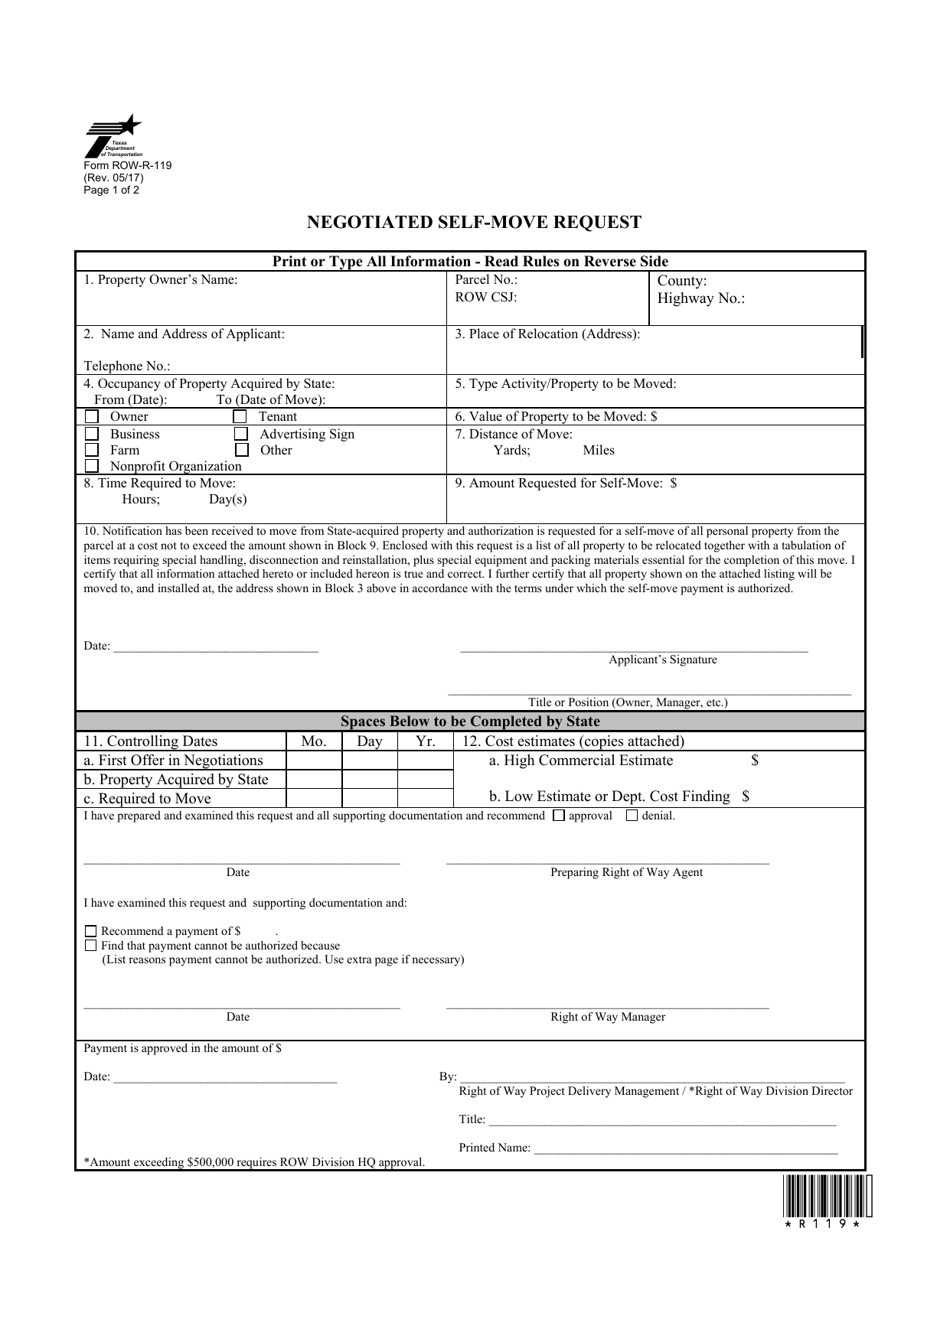 Form ROW-R-19 Negotiated Self-move Request - Texas, Page 1